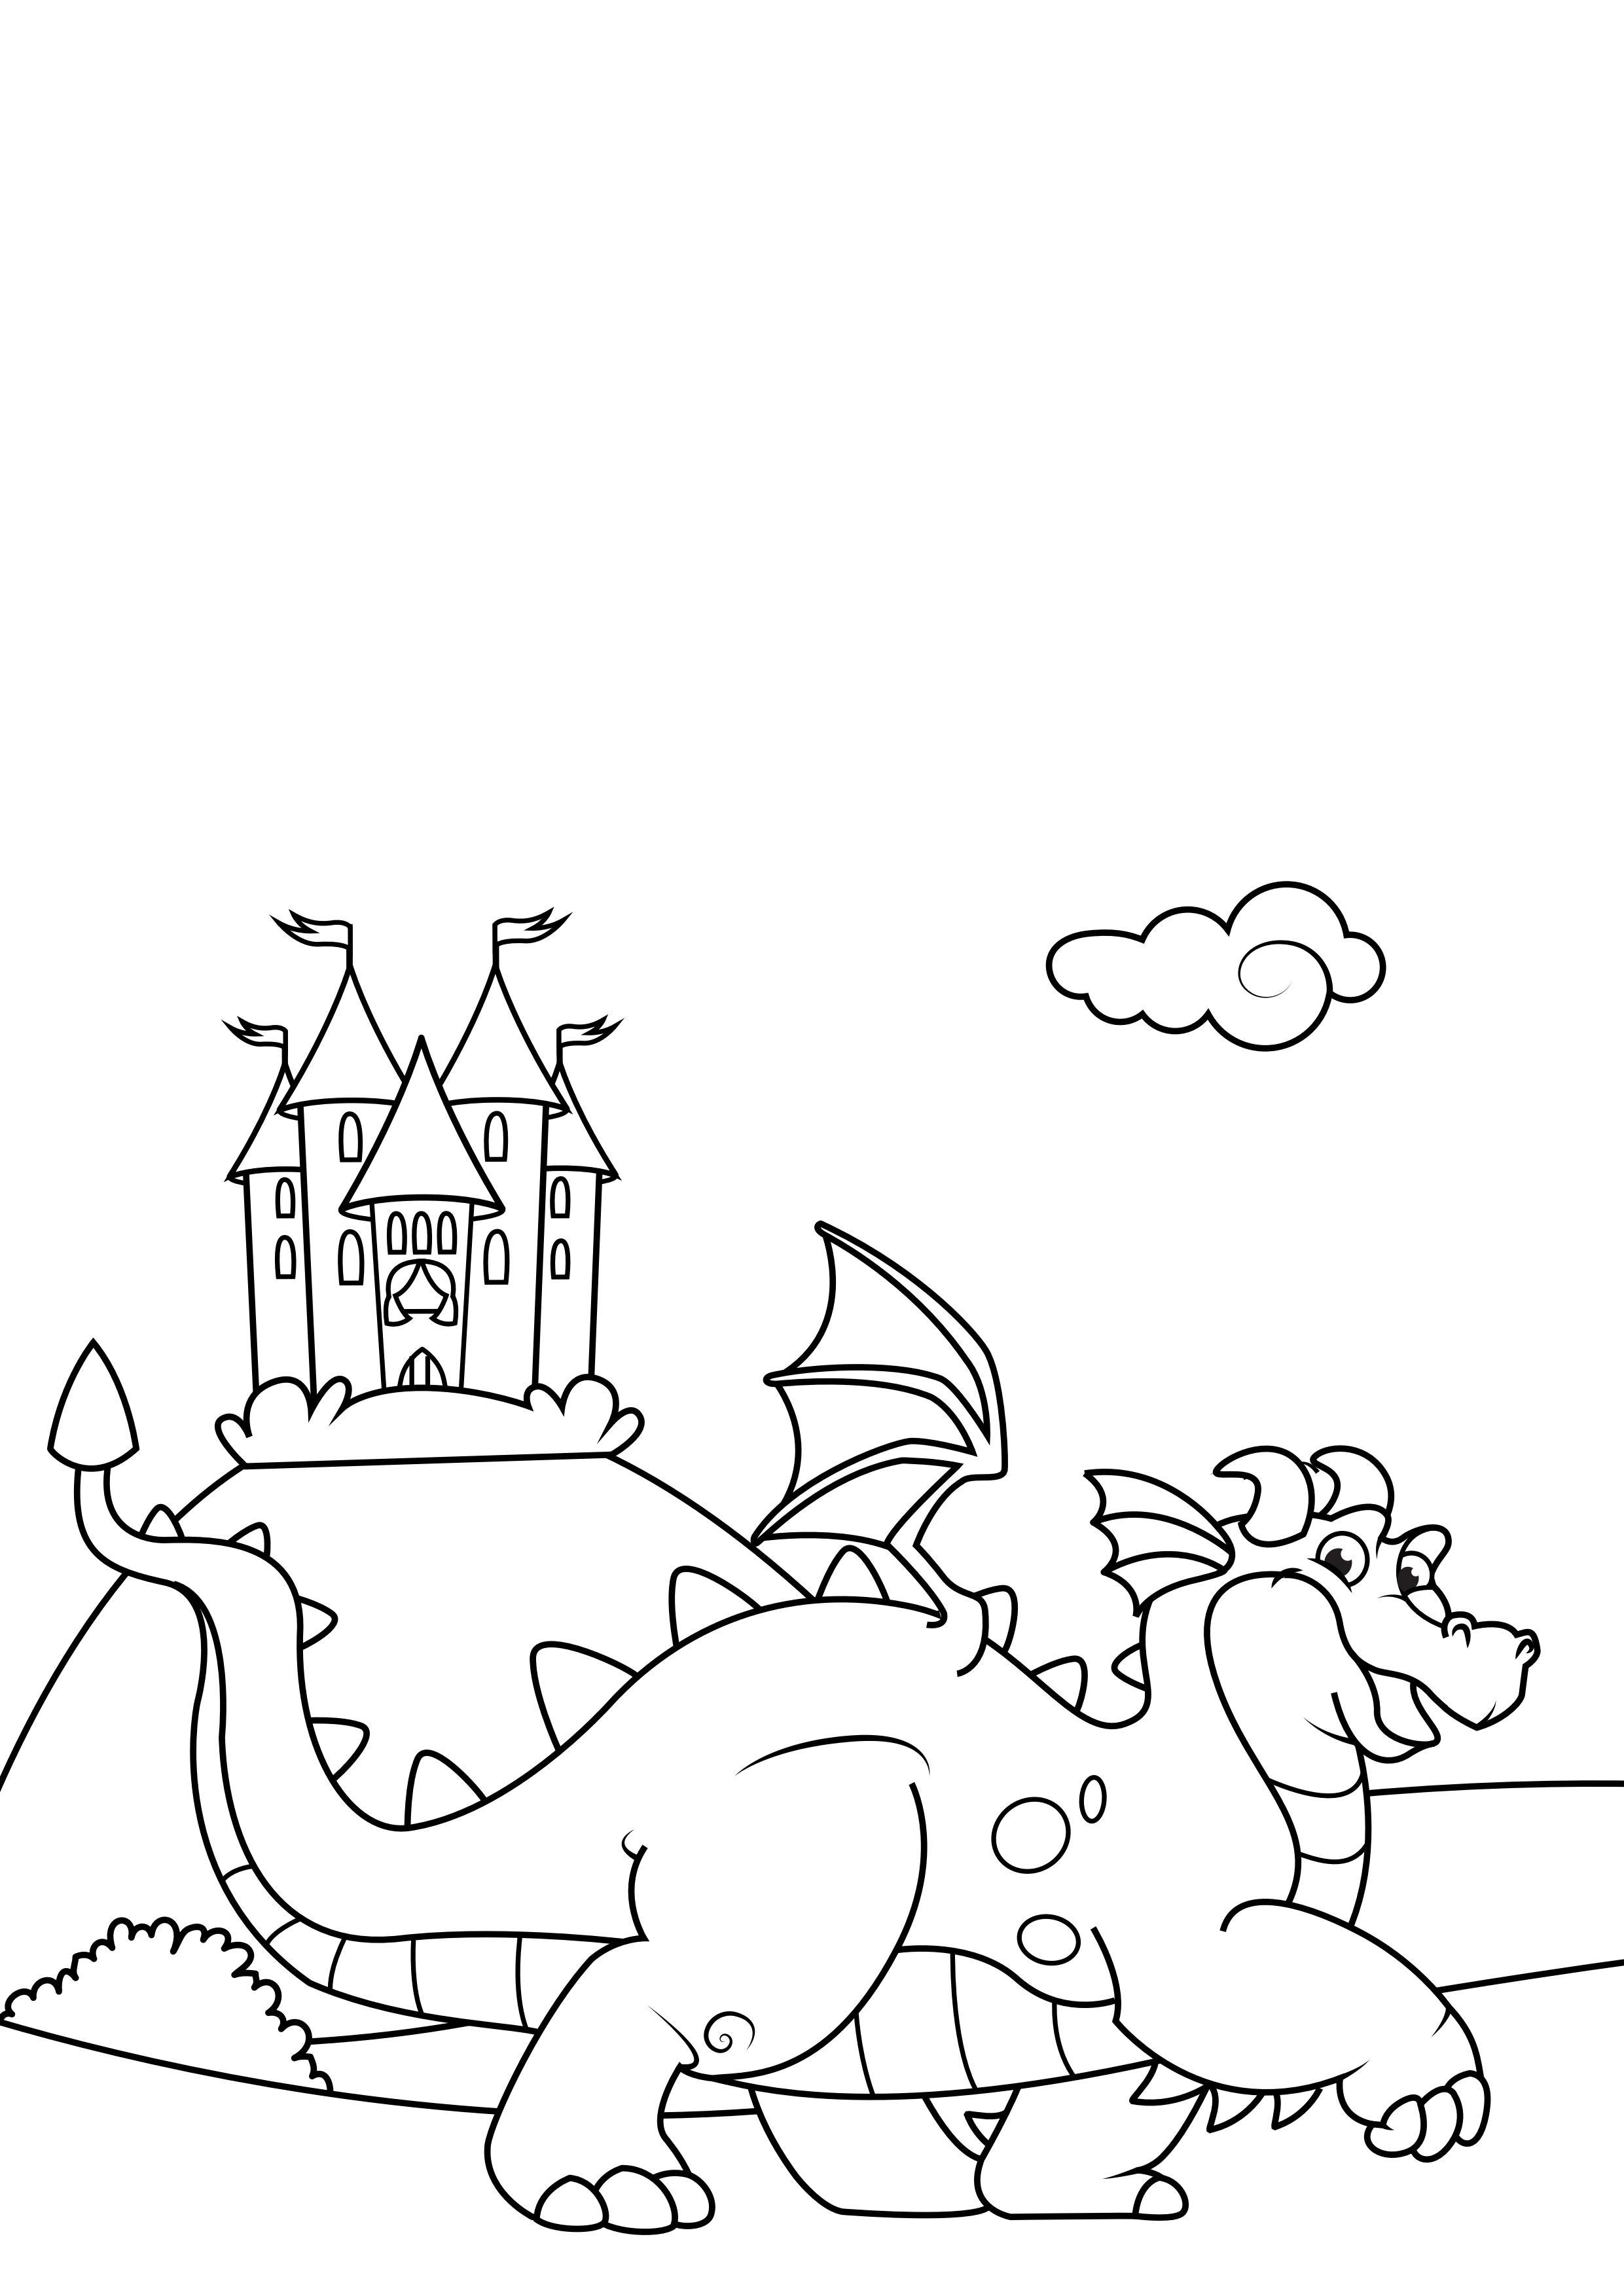 Coloring page dragon in front of castle